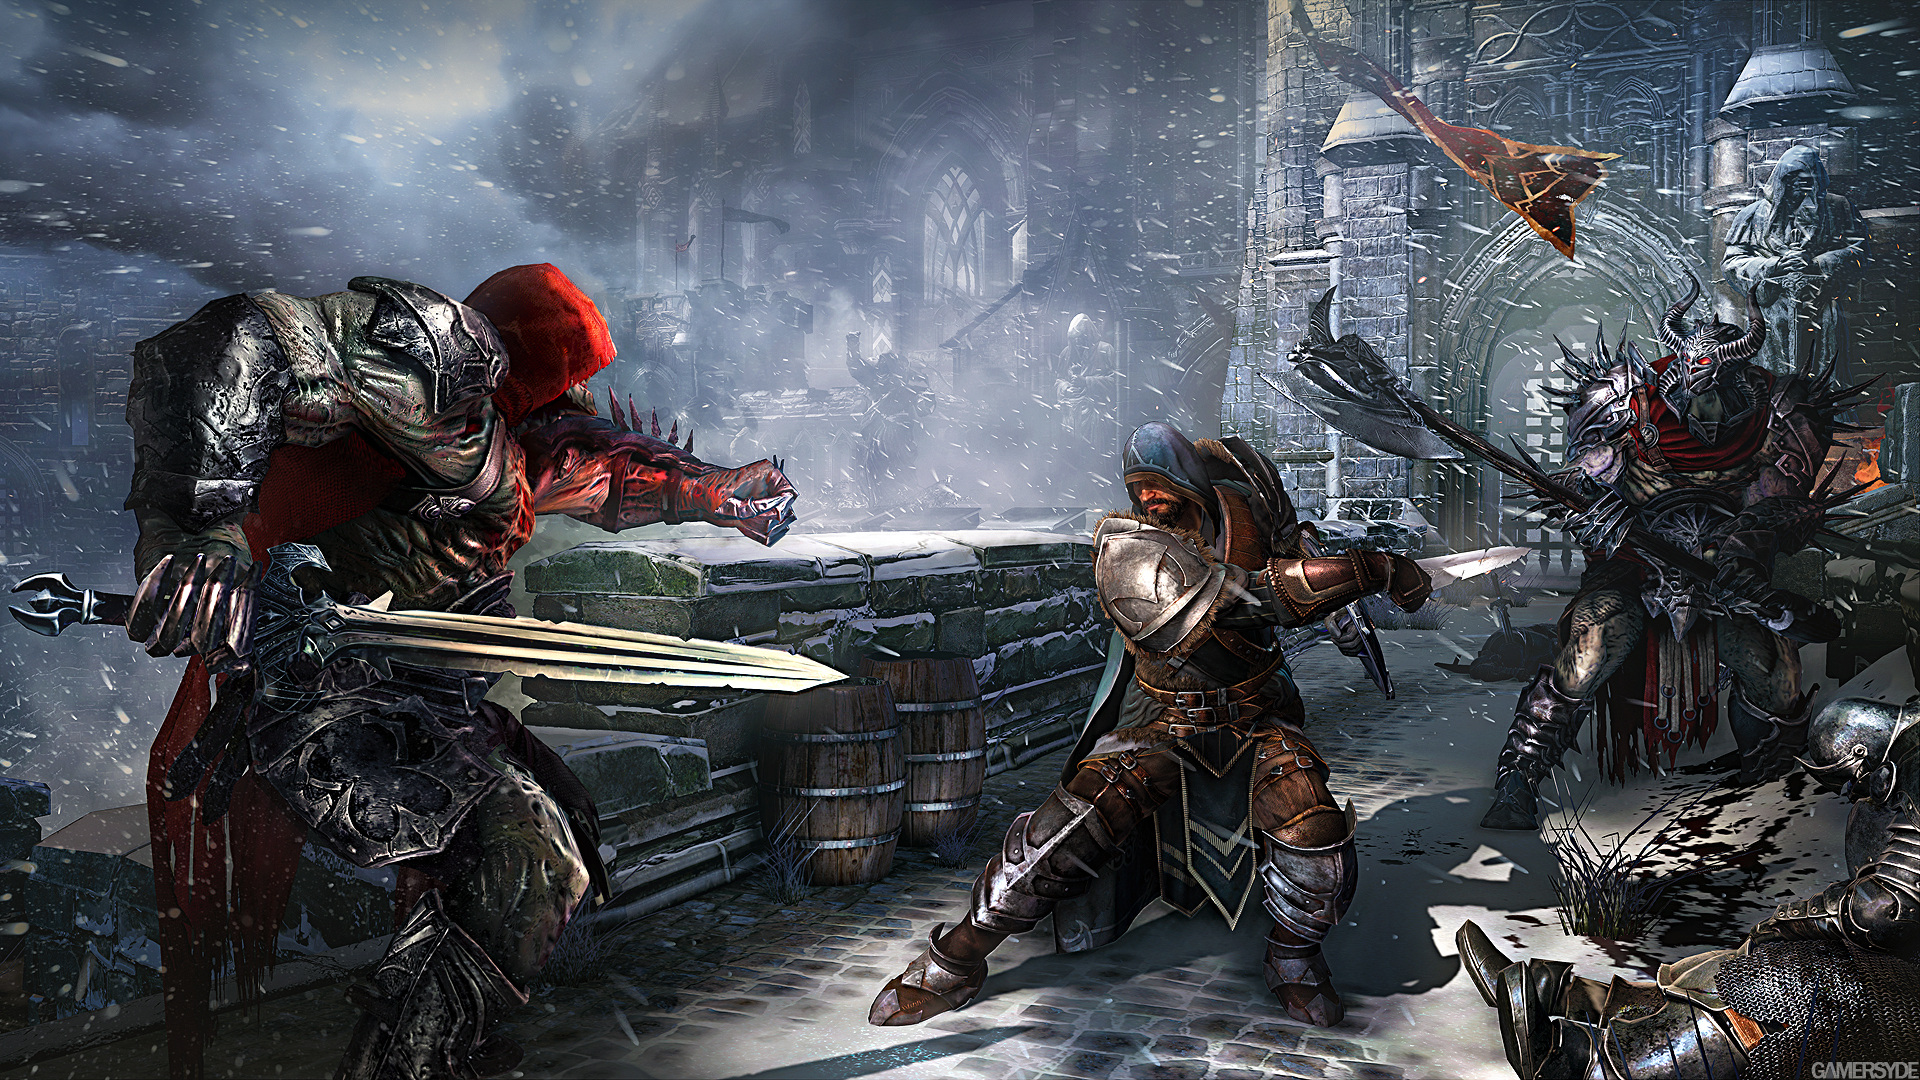 Lords of the Fallen: Gameplay video - Gamersyde